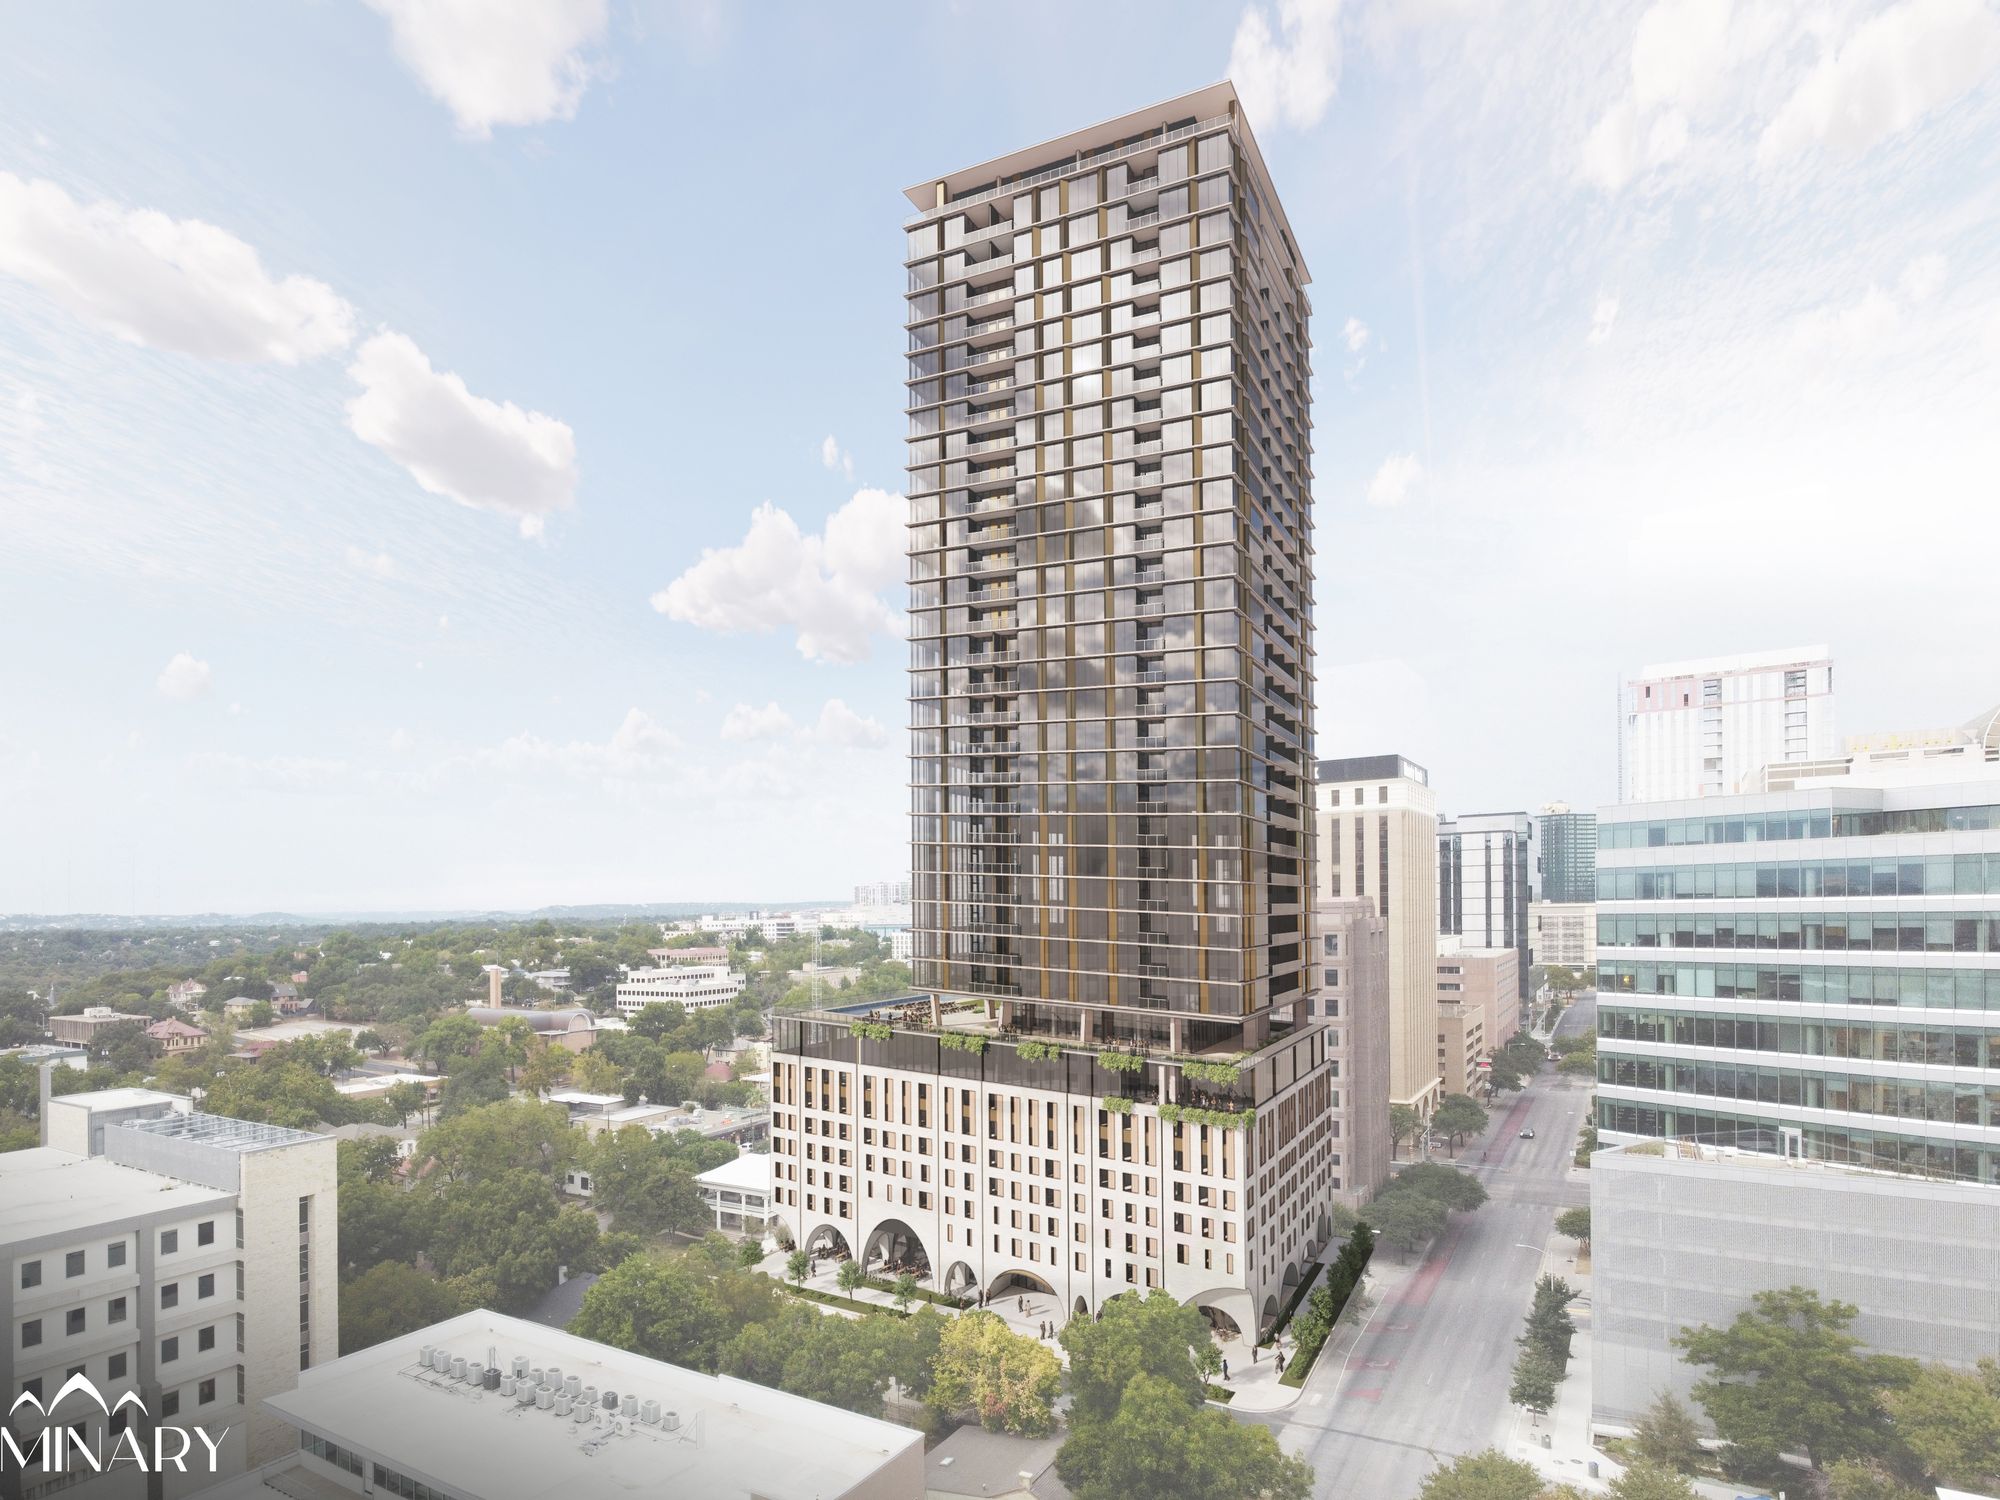 Northland Living downtown Austin tower rendering